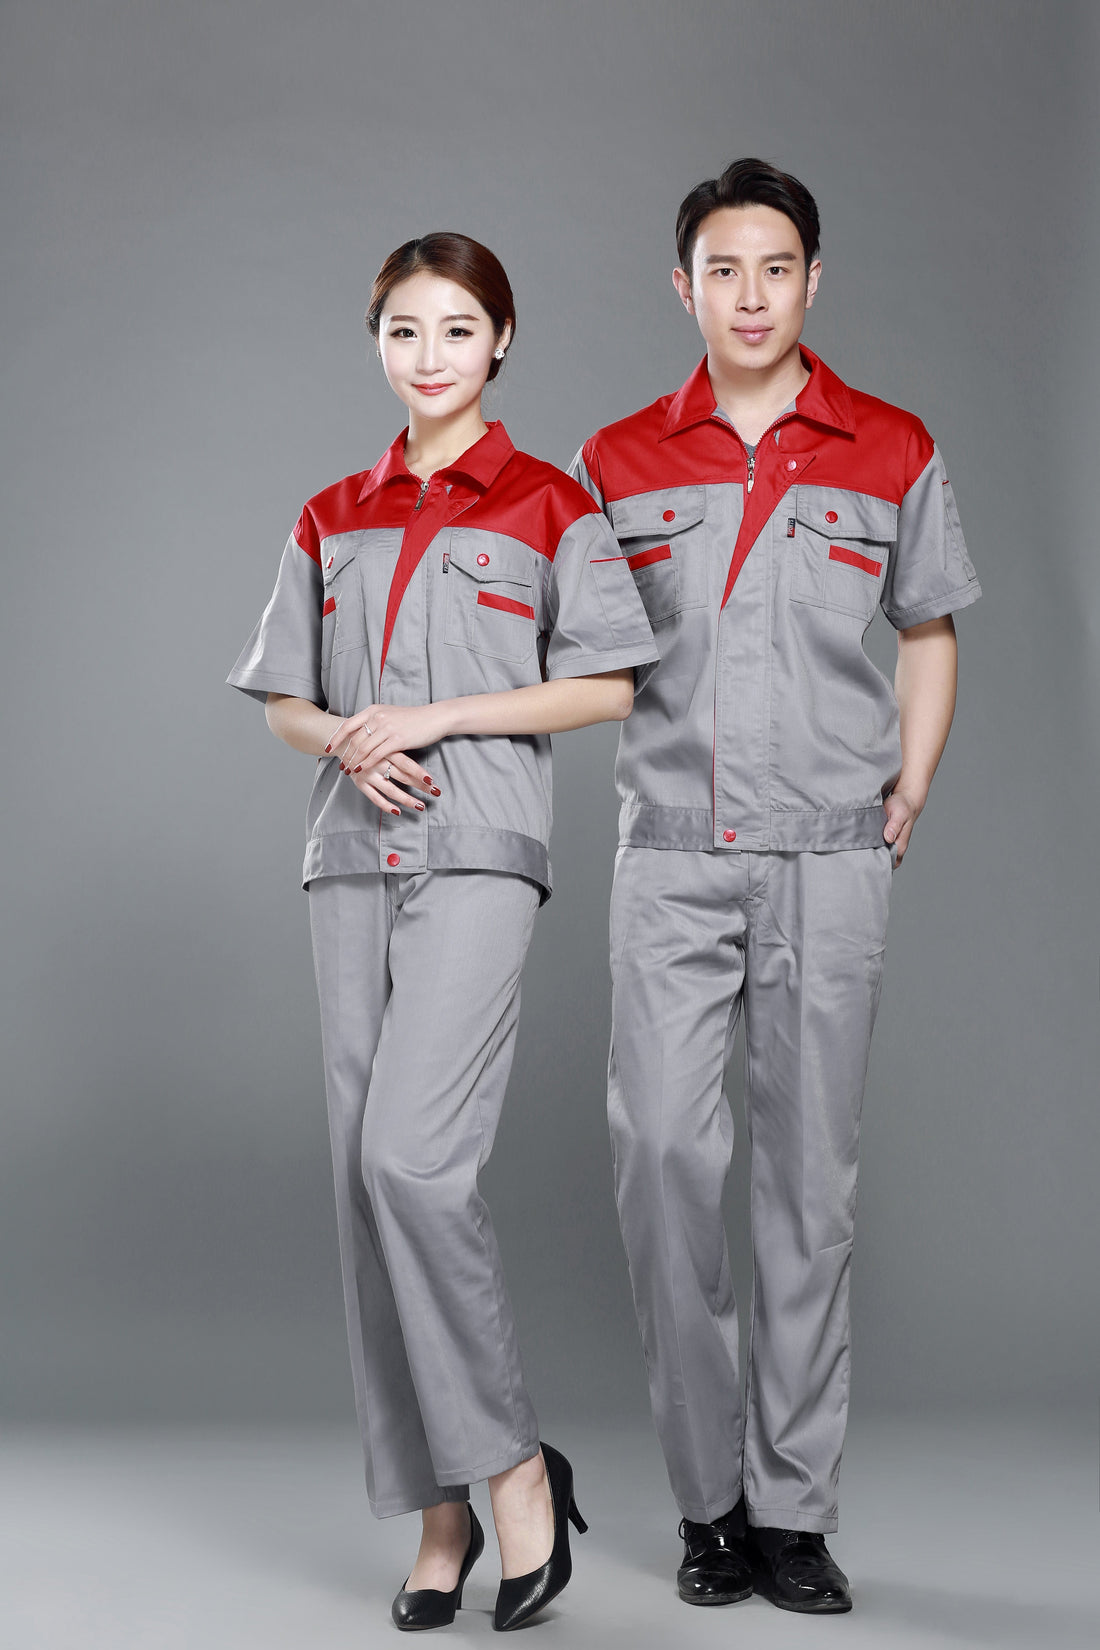 Corals Trading Co. 可樂思百貨商行 涤棉 Short-sleeved polyester cotton overalls for summer SD-S2408